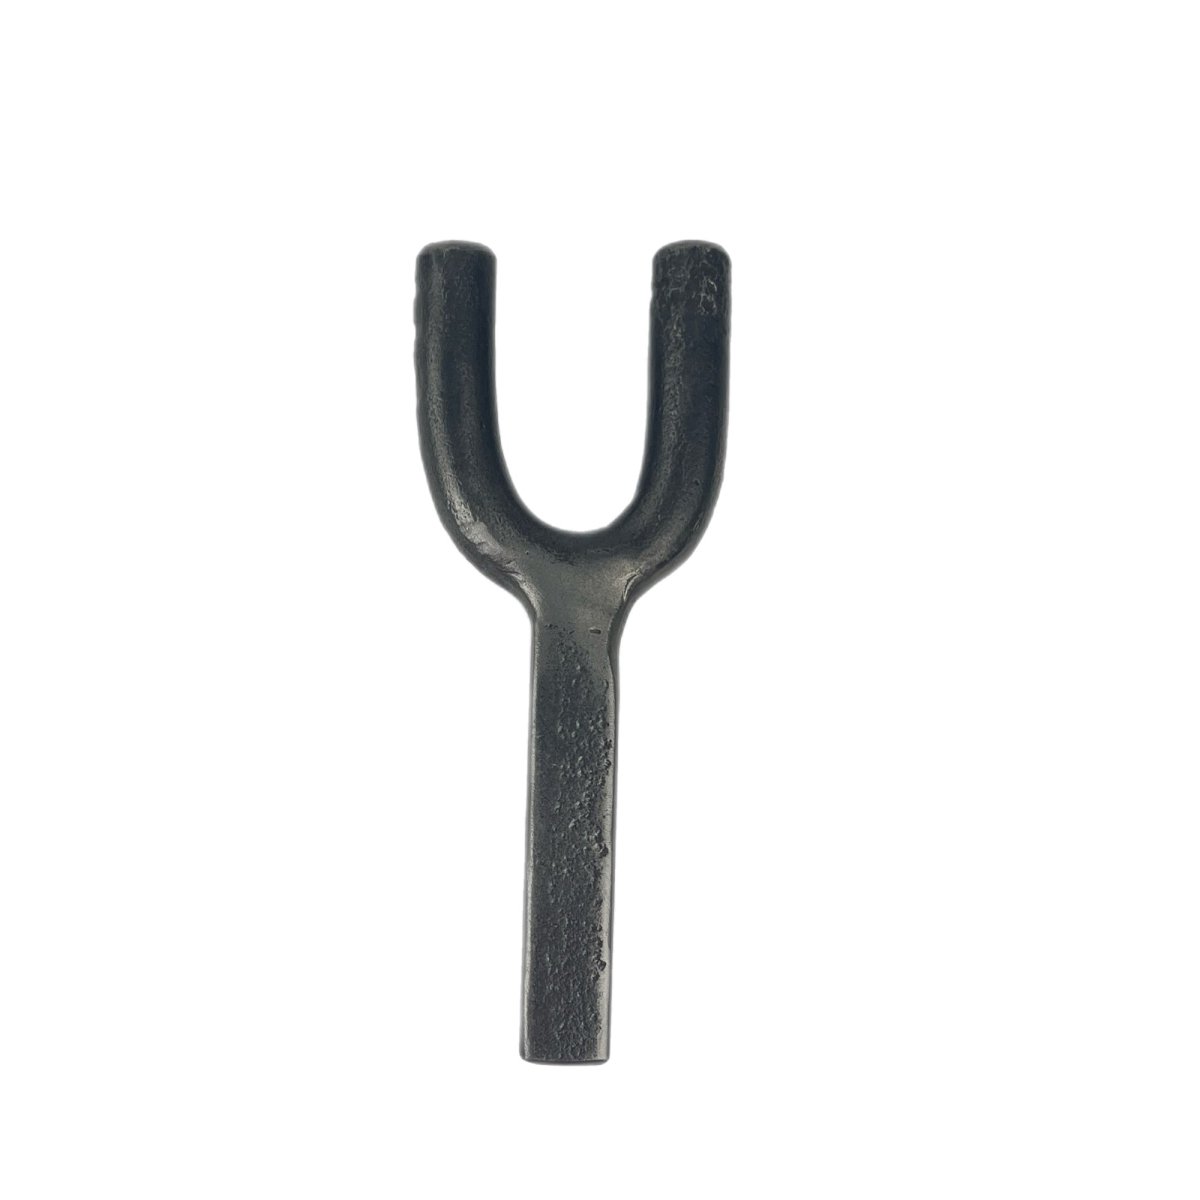 Hand forged blacksmith bending fork premium anvil tool from AncientSmithy